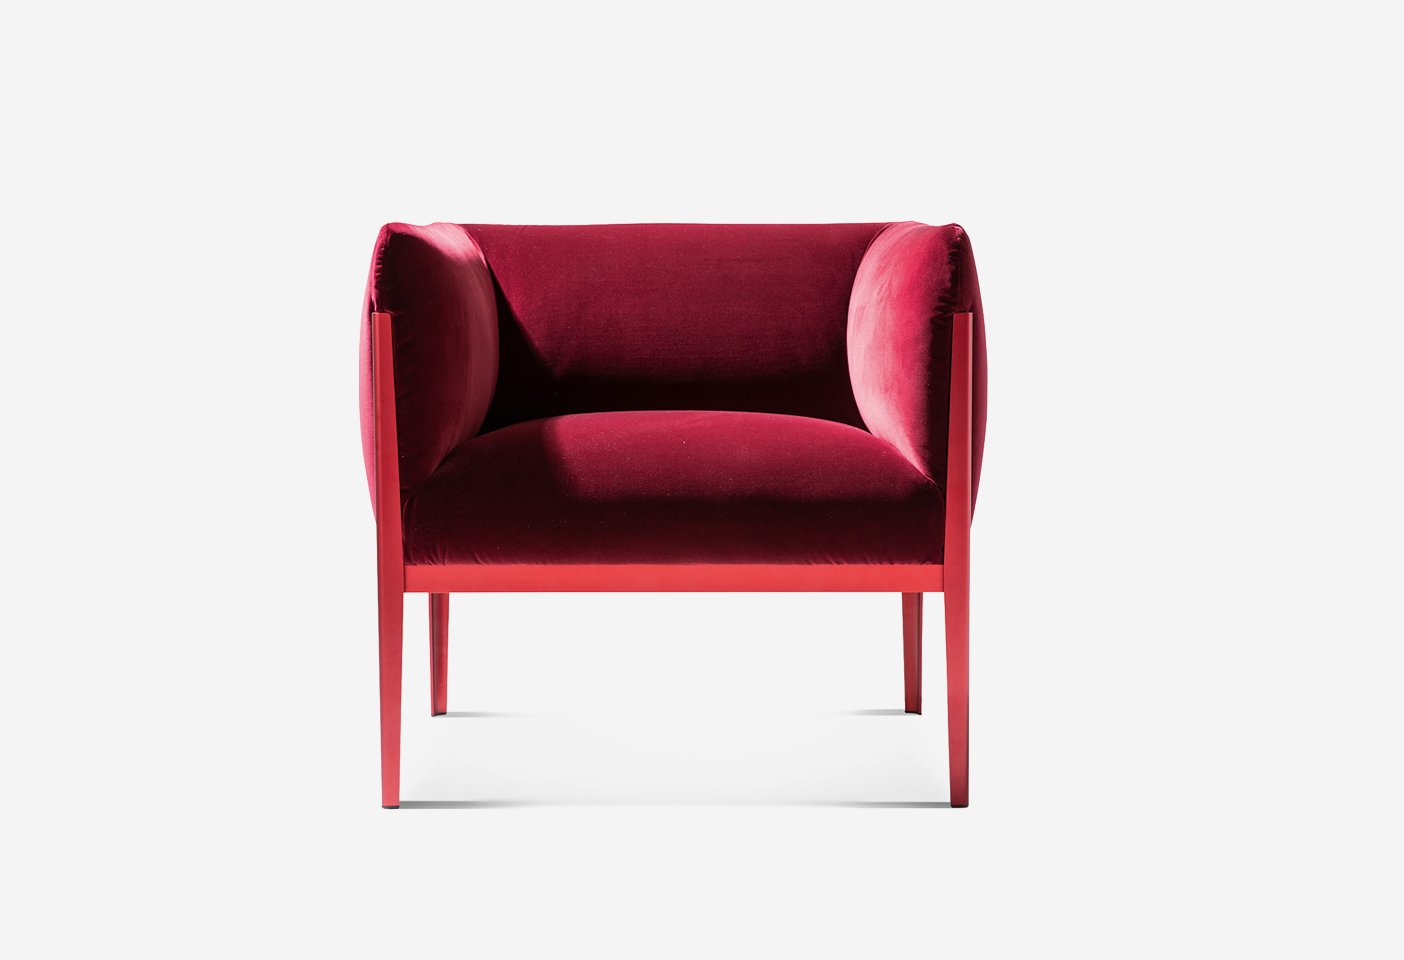 Cotone Armchair by Ronan & Erwan Bouroullec for Cassina. Photo c/o Cassina. 